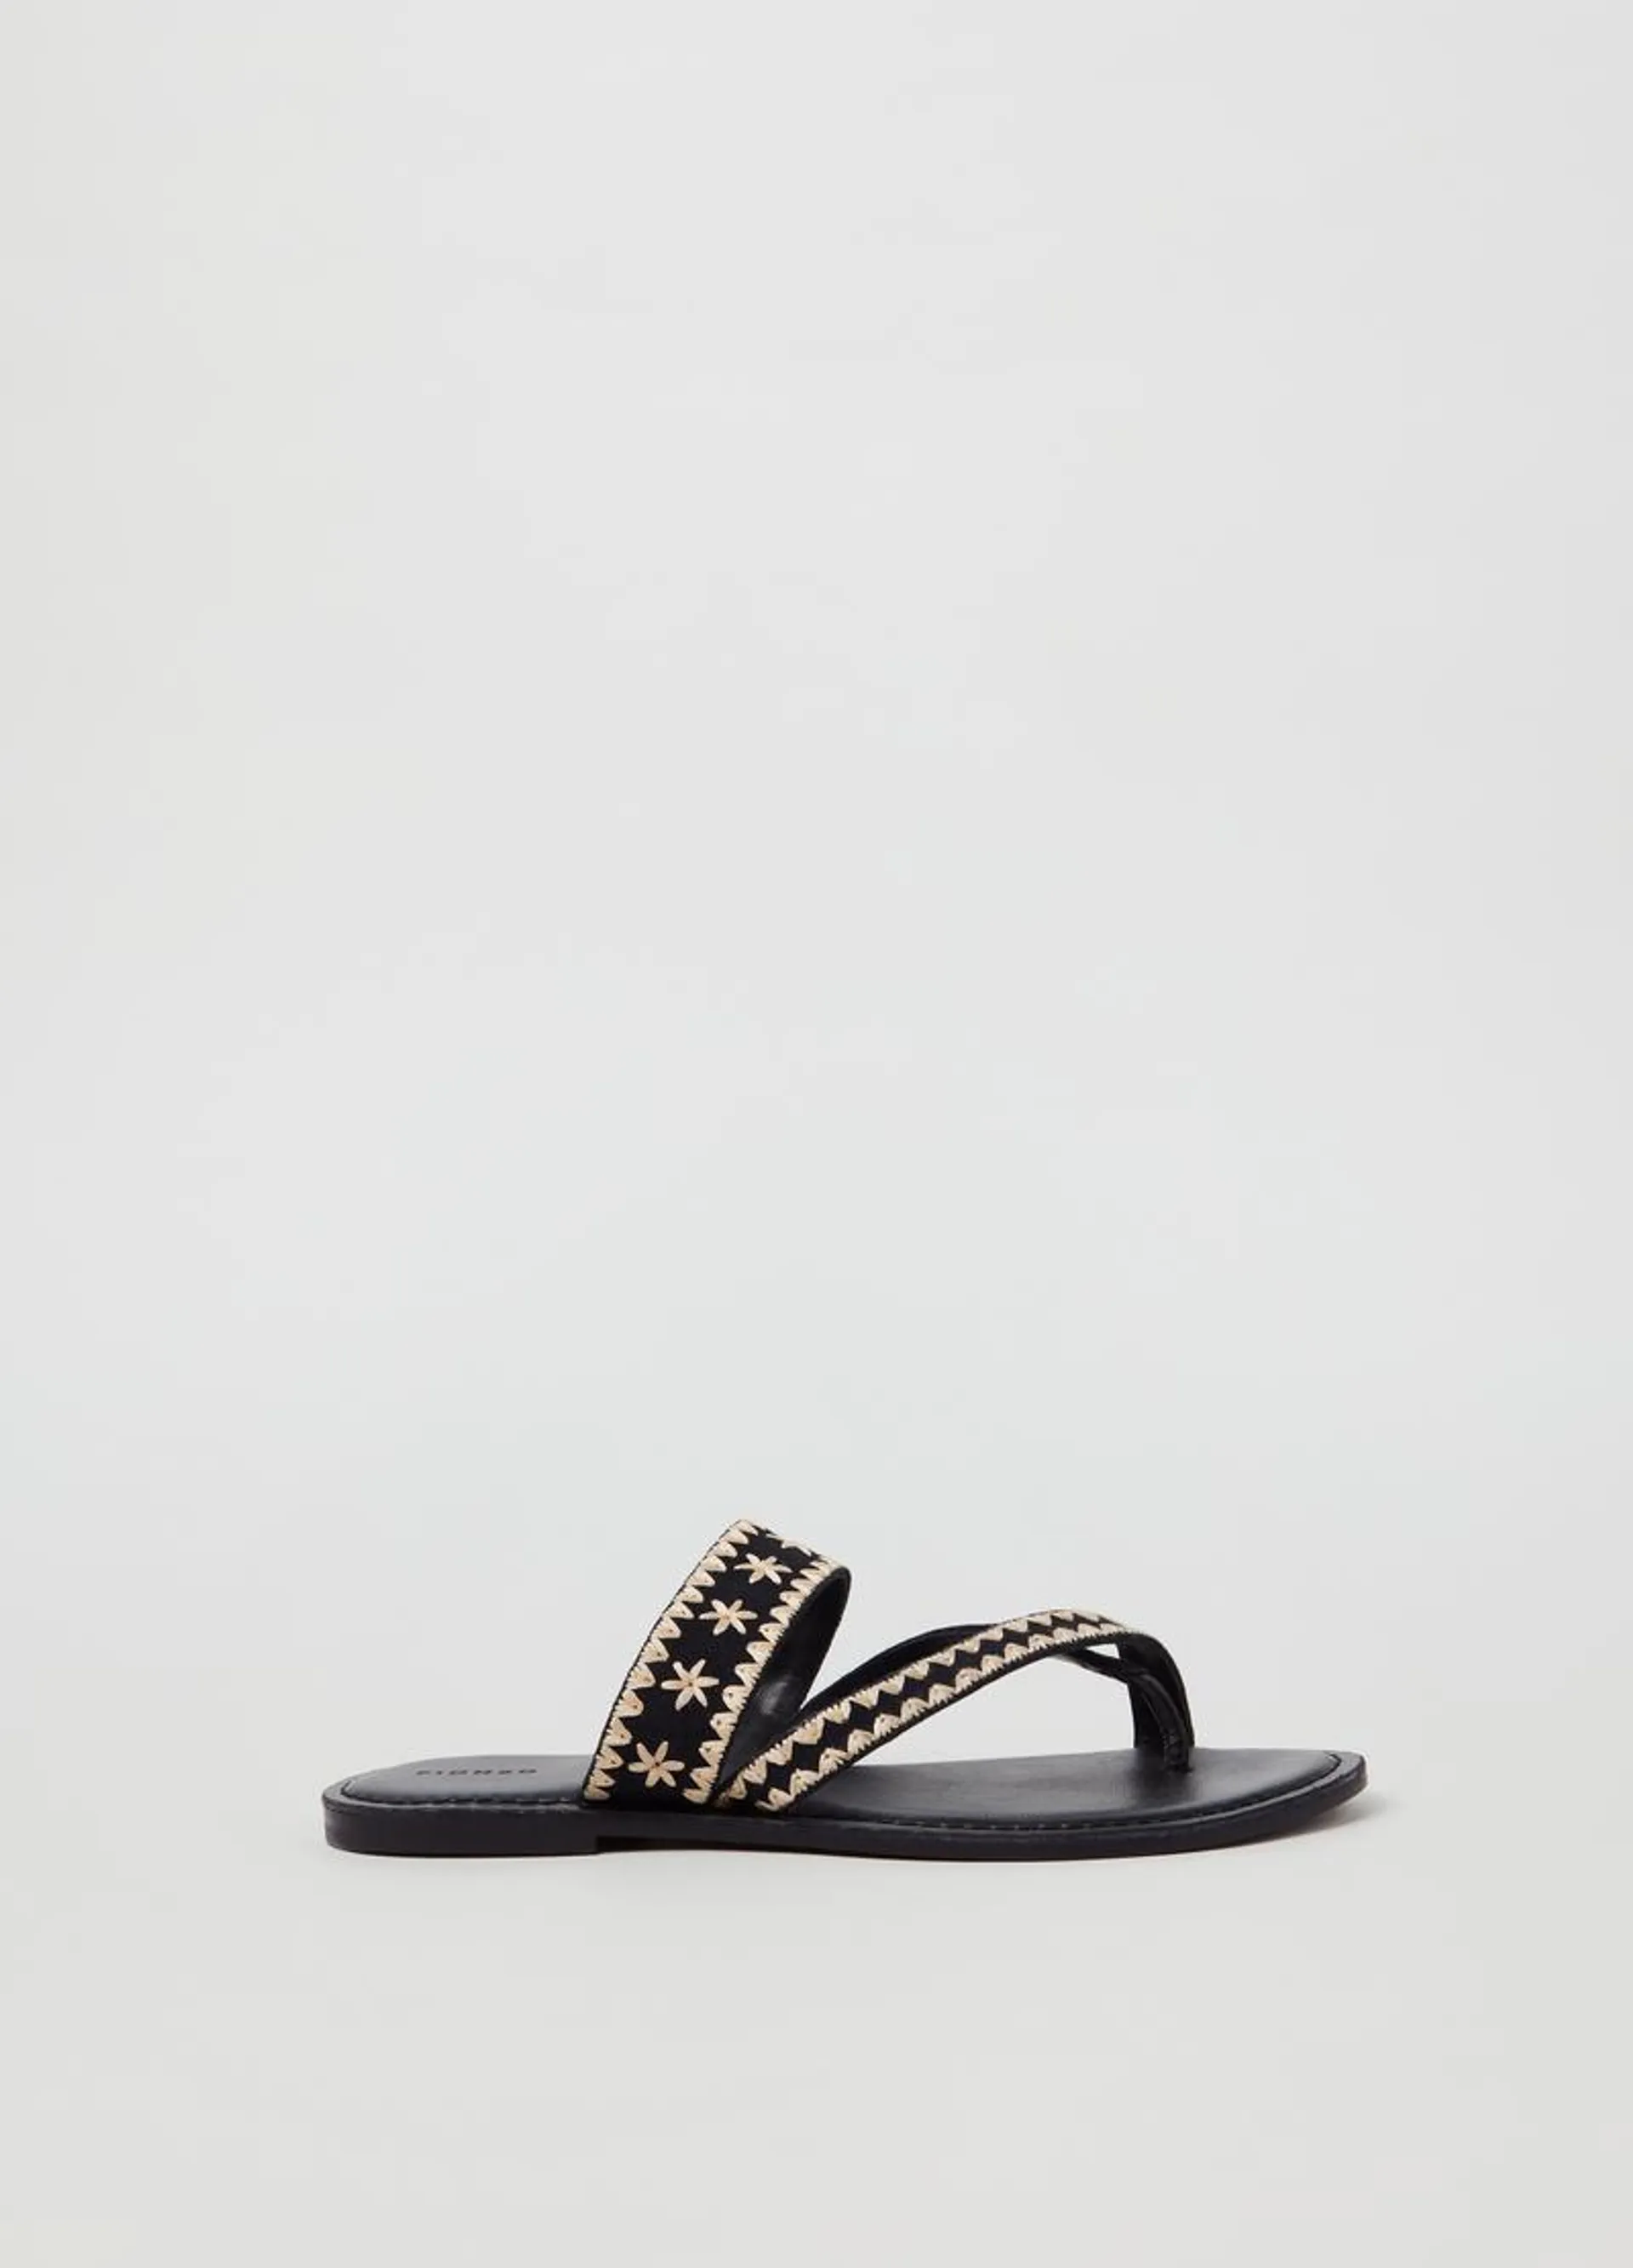 PIOMBO sandal with traditional motif